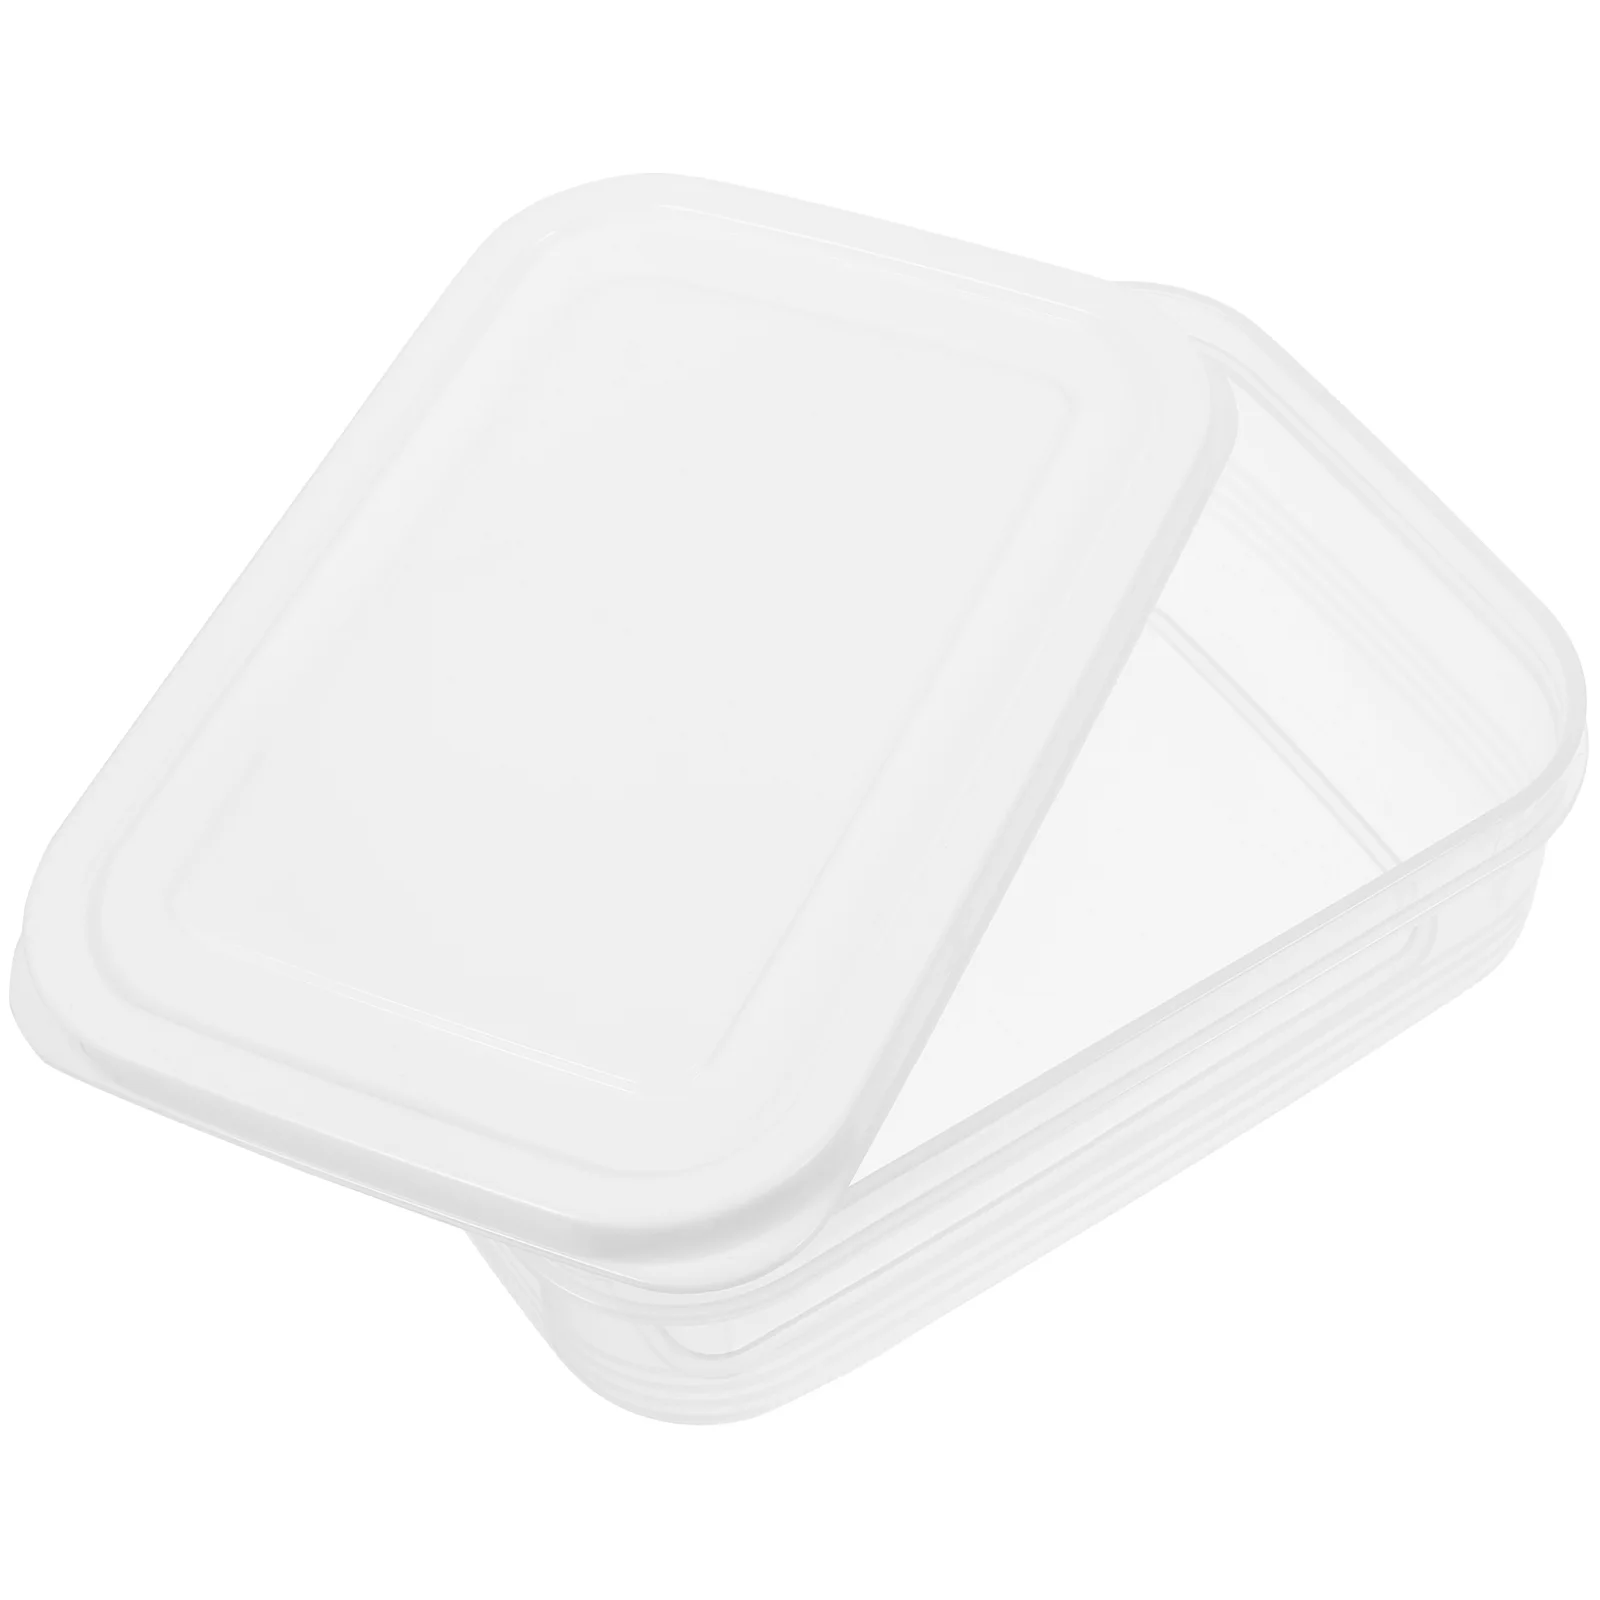 

Refrigerator Storage Box Containers Fridge Organizers Lids Rectangle Bins Stackable White